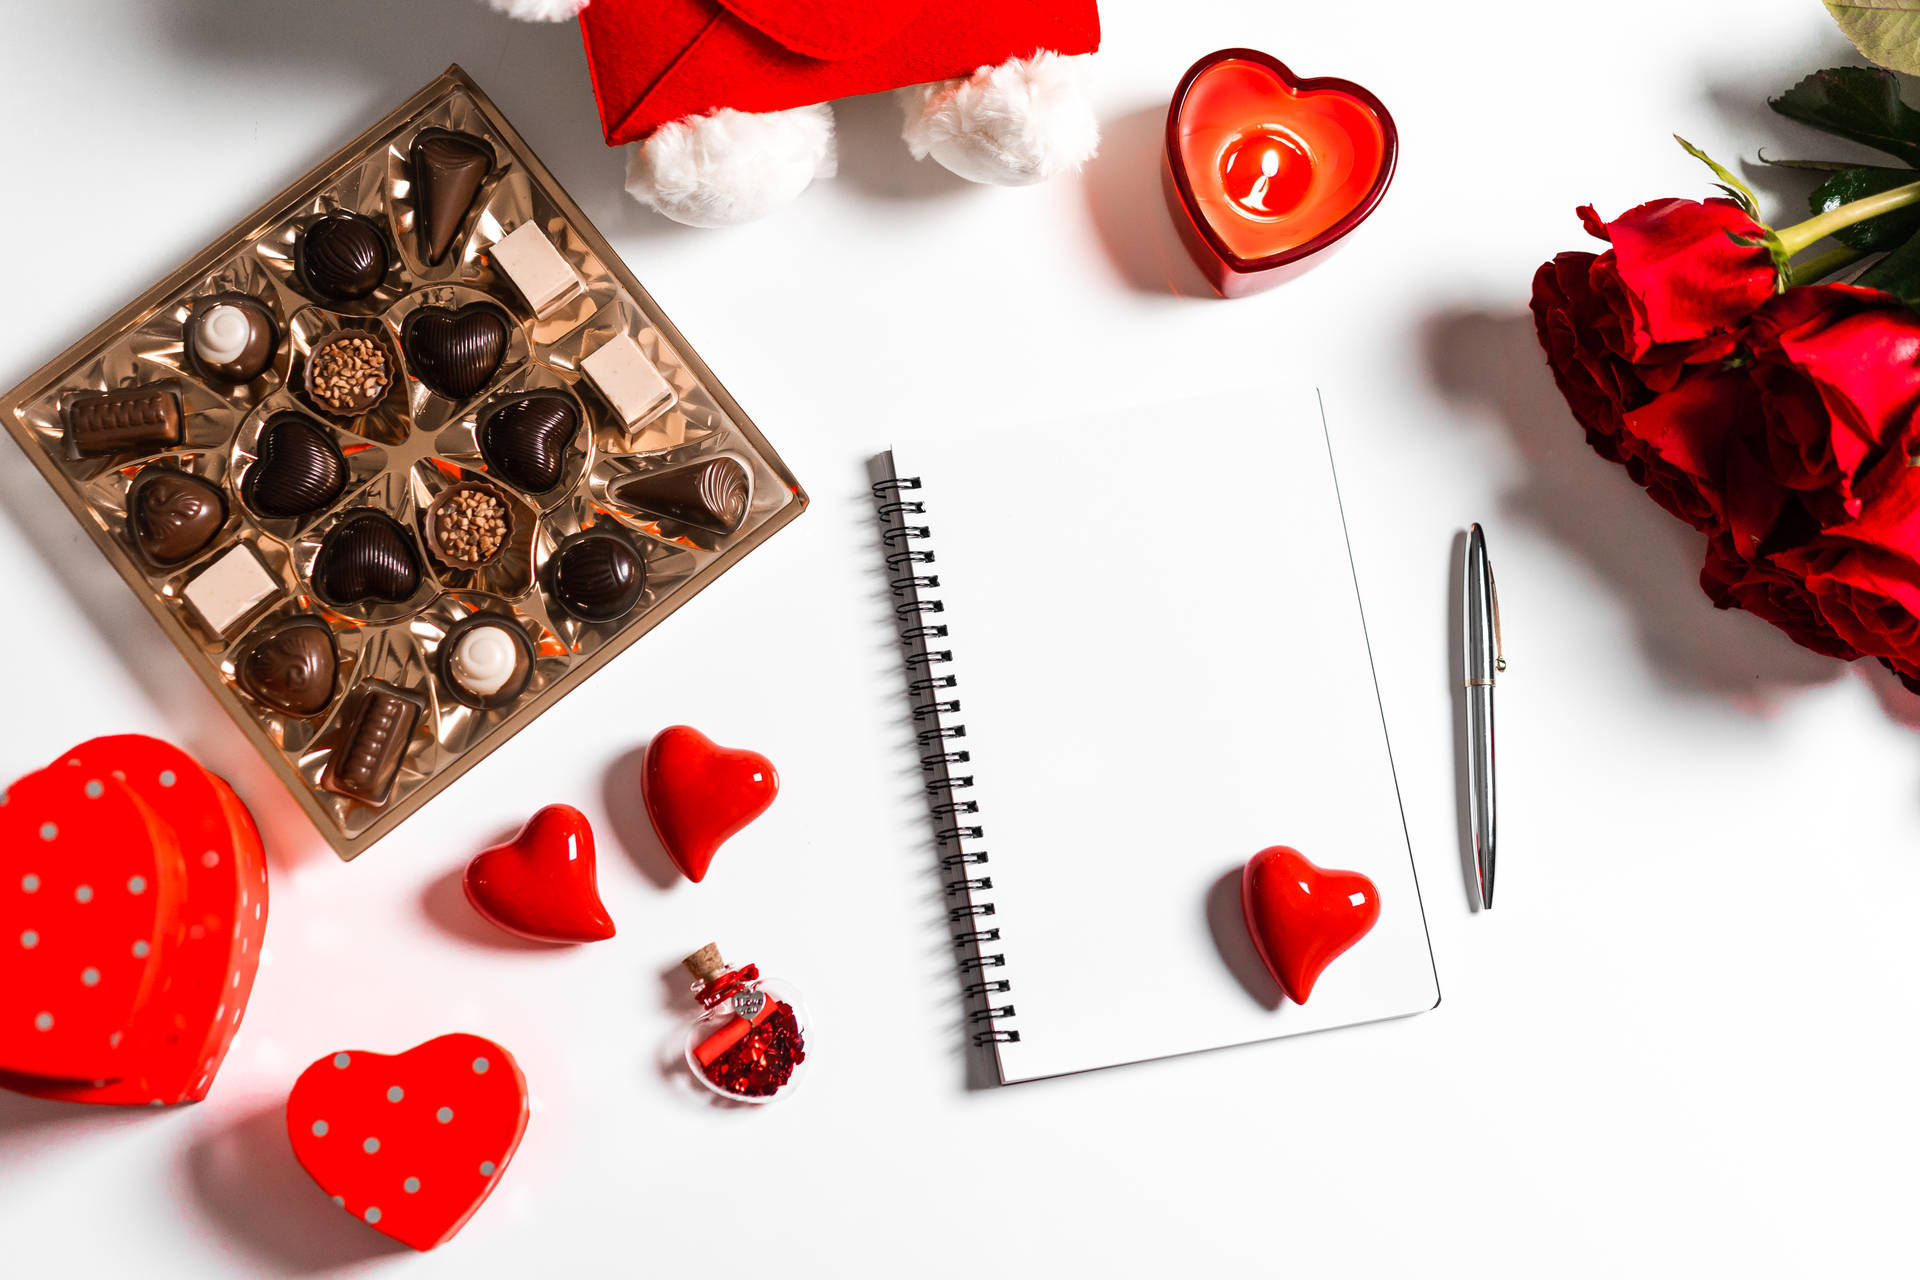 The Symbol Of Love: Romantic Flowers With Chocolates And A Notebook